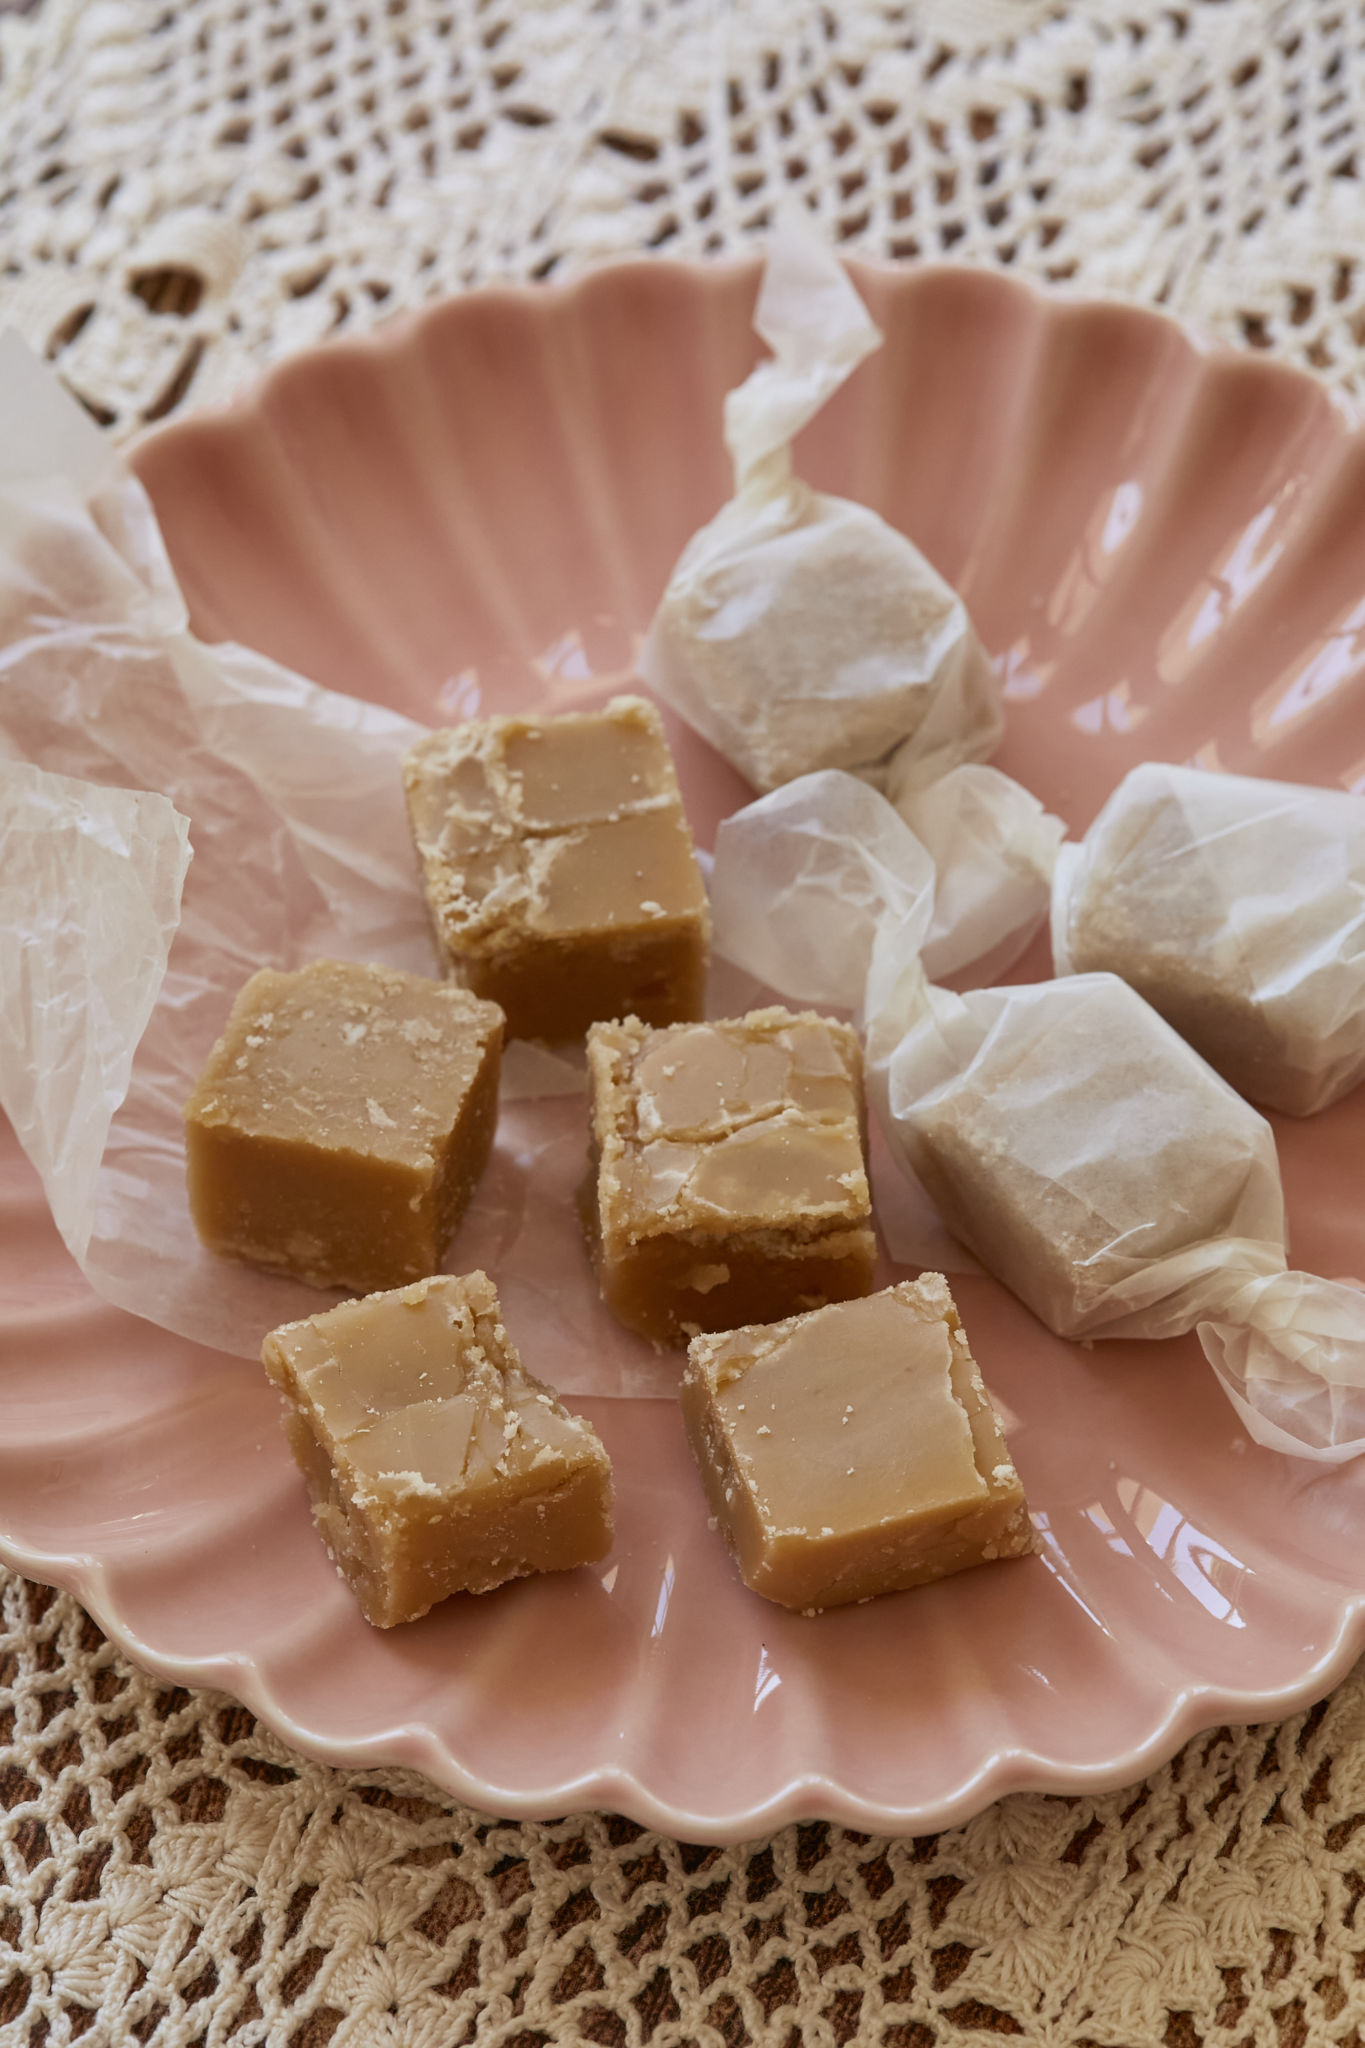 Square homemade candy made with maple syrup are served on a pink dish. The homemade candy is wrapped in wax paper